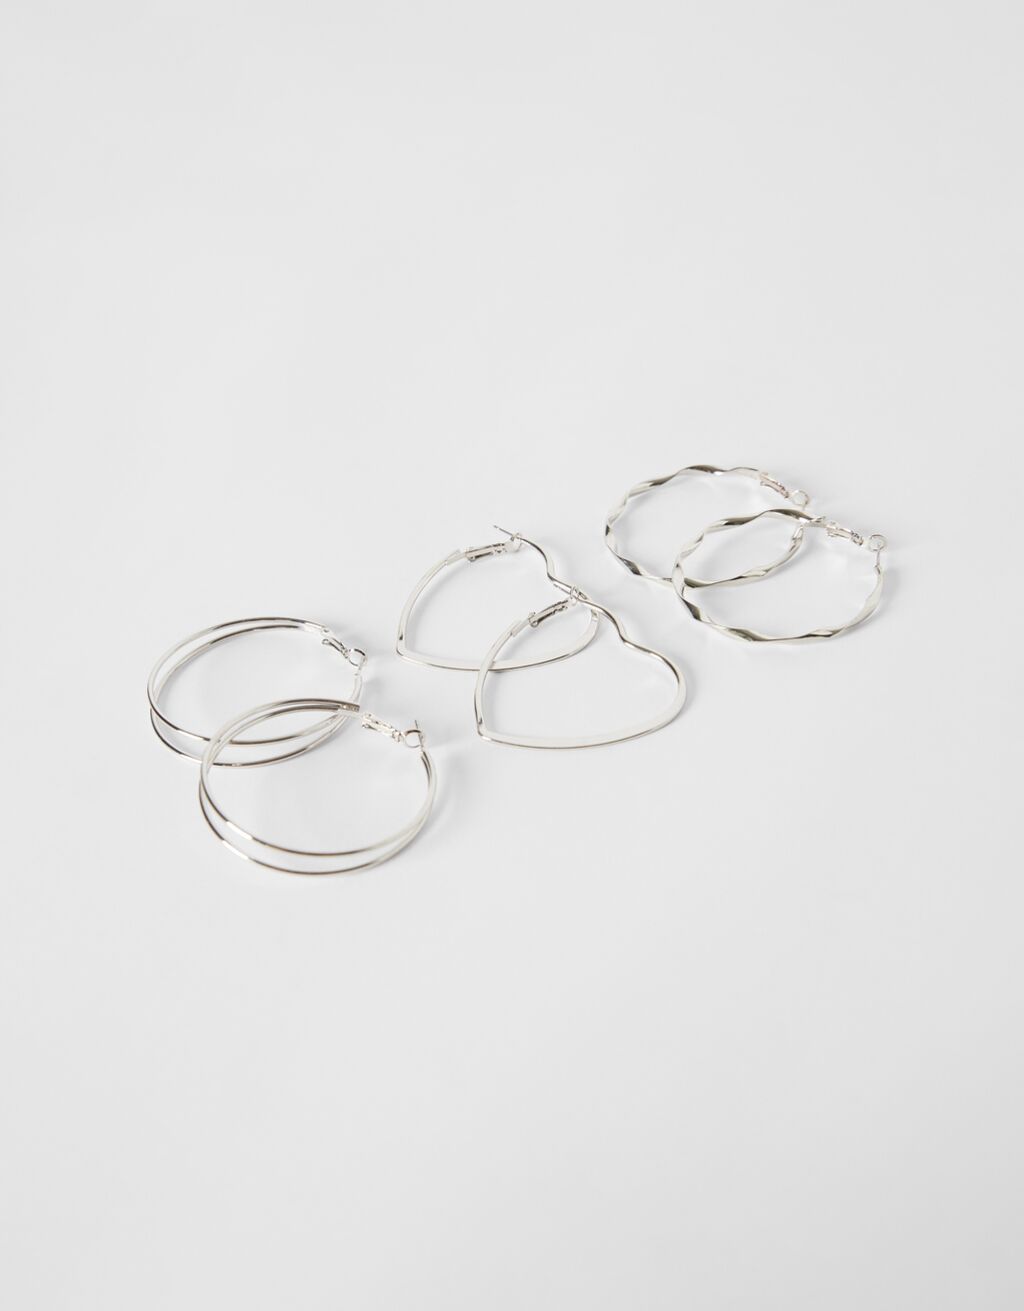 Set of 3 pairs of hoop earrings: thin hoops, textured and double heart